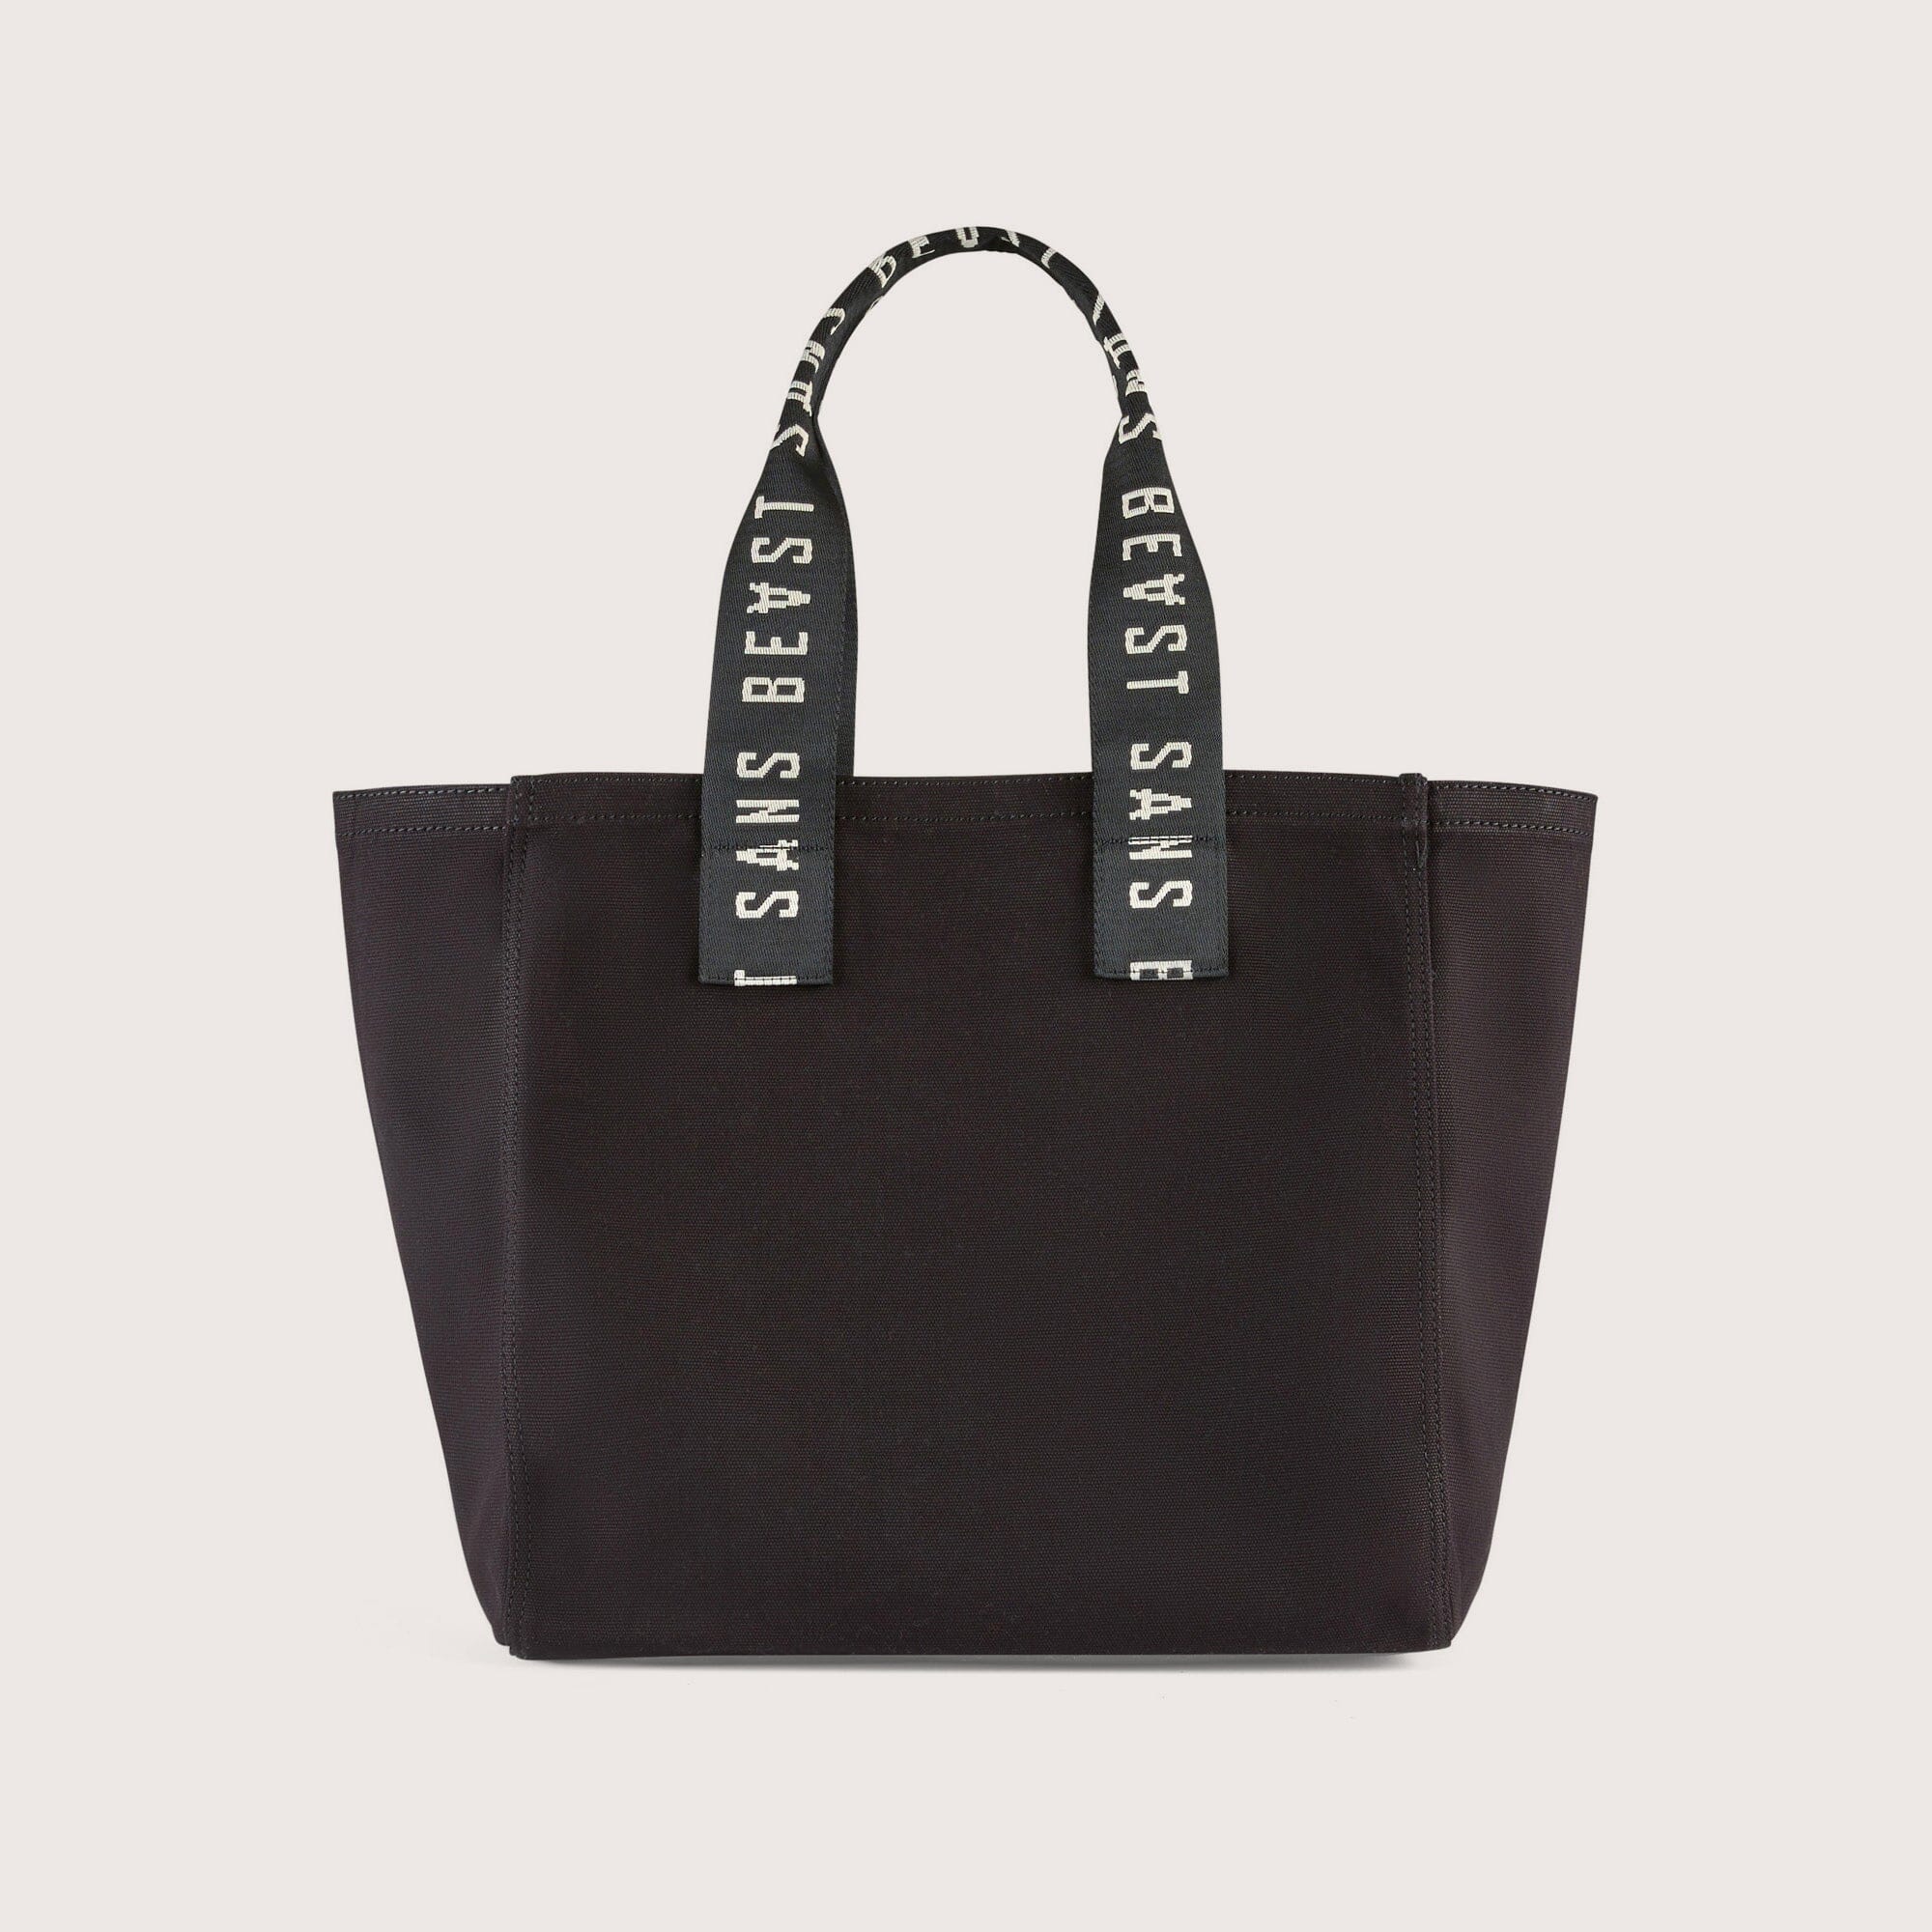 Xtra Overflow Canvas Tote Bag Black 